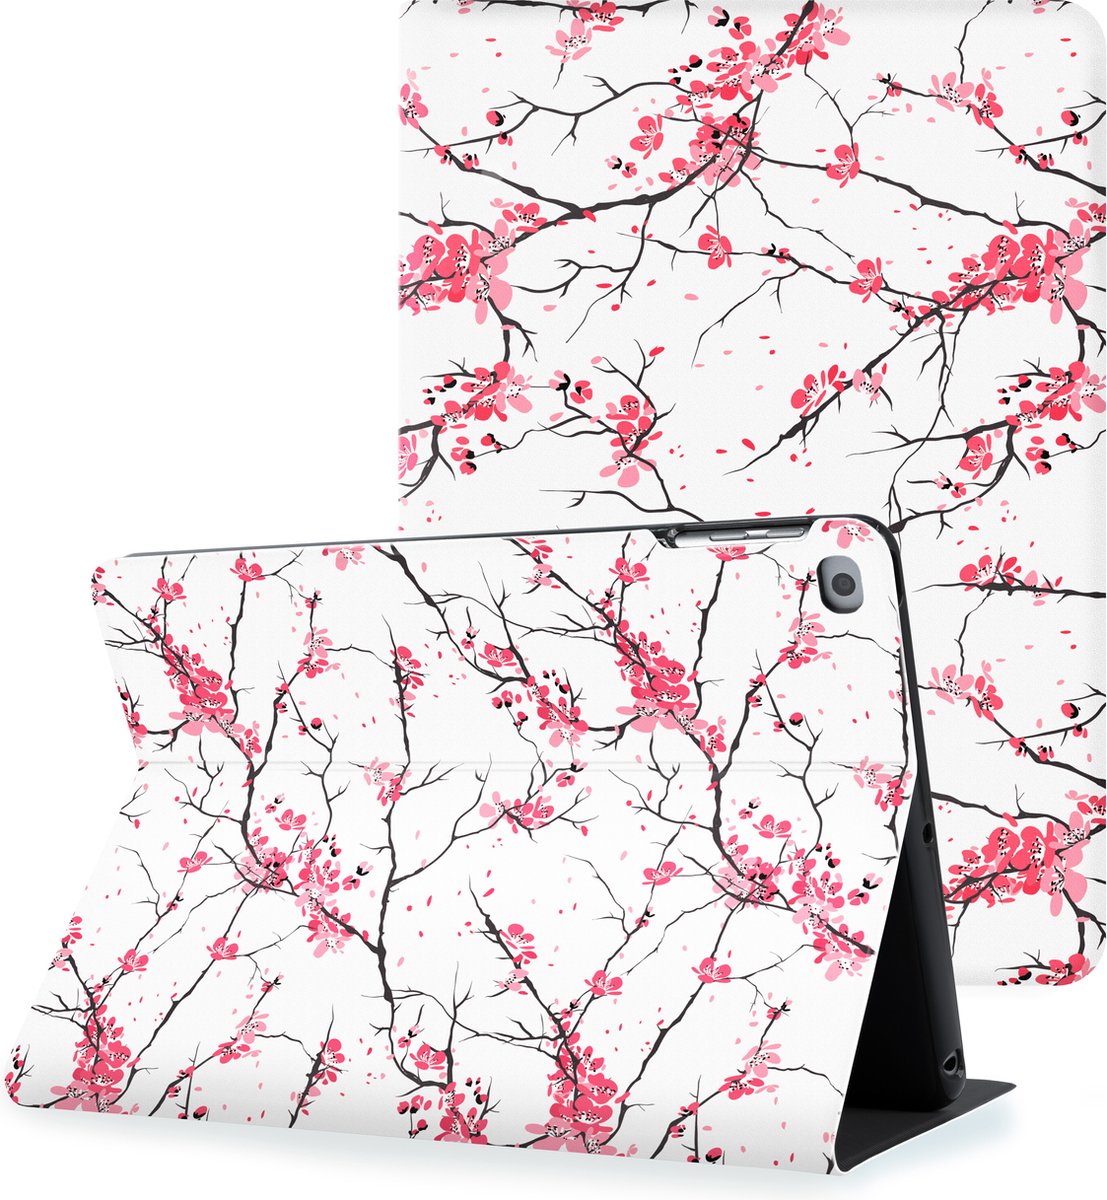 iPad Air 1 2013 / Air 2 2014 hoes - iPad 9.7 inch hoes - Smart Bookcase - Cherry Blossom